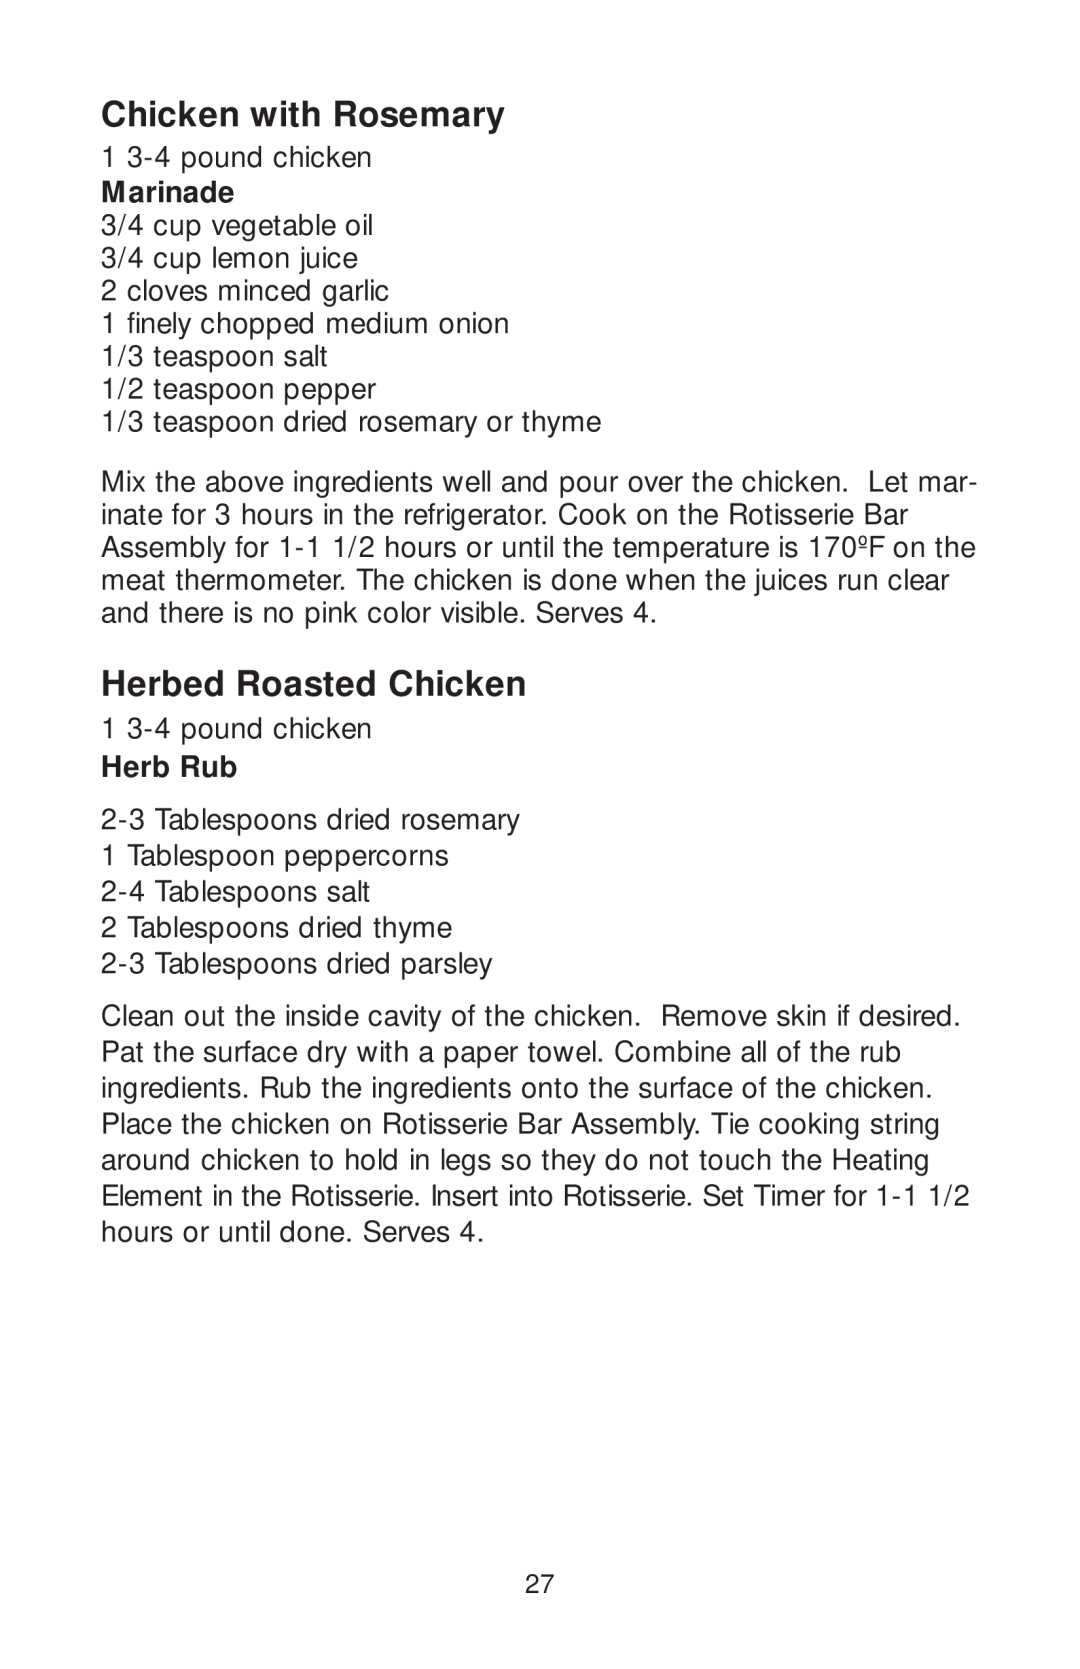 George Foreman GR82 owner manual Chicken with Rosemary, Herbed Roasted Chicken, Herb Rub, Marinade 